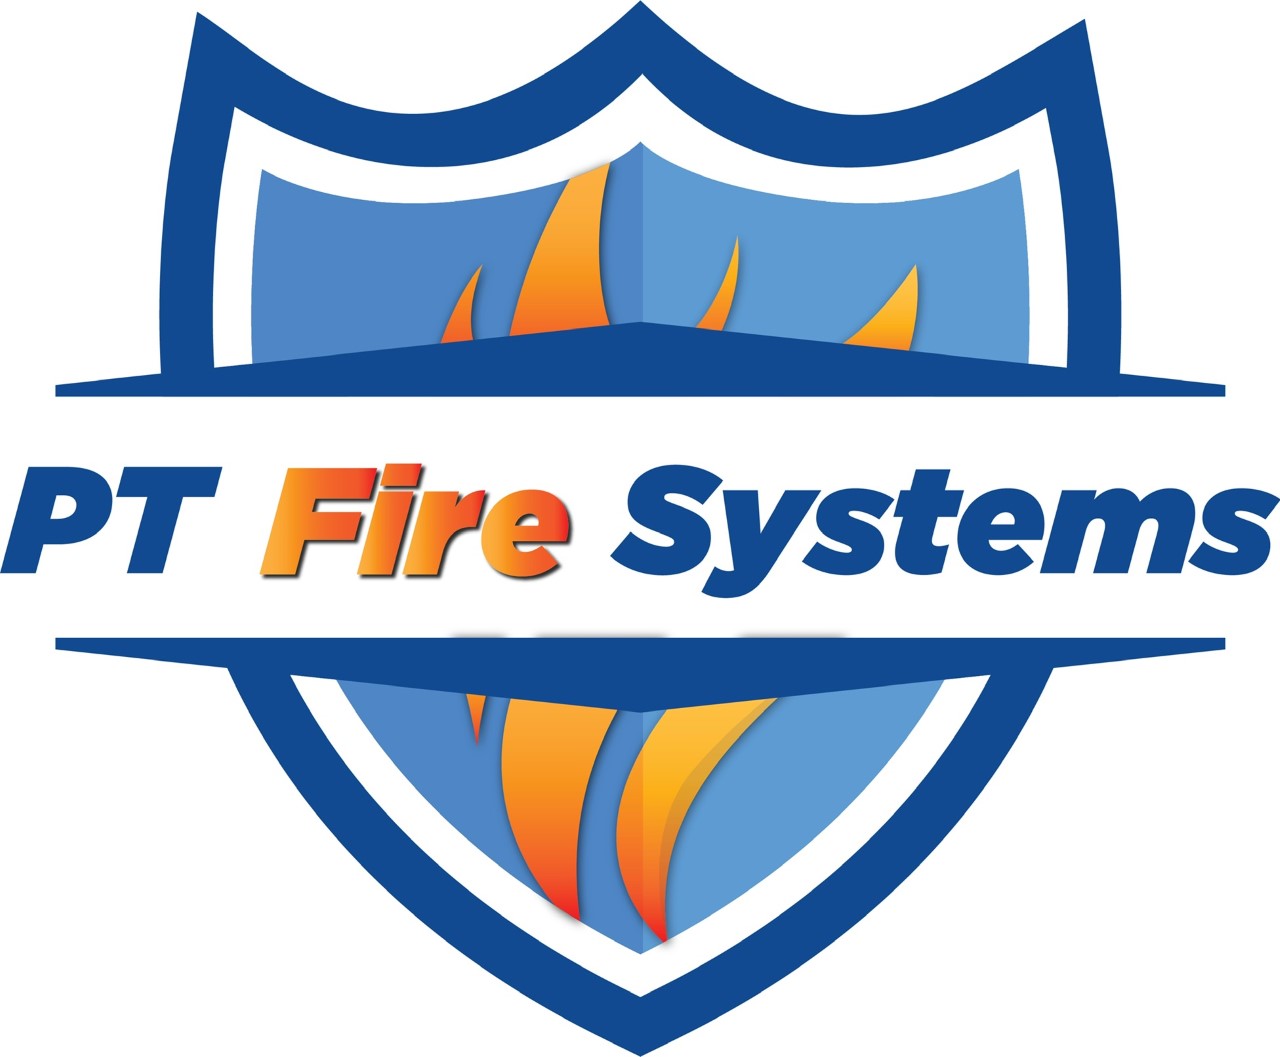 PT Fire Systems